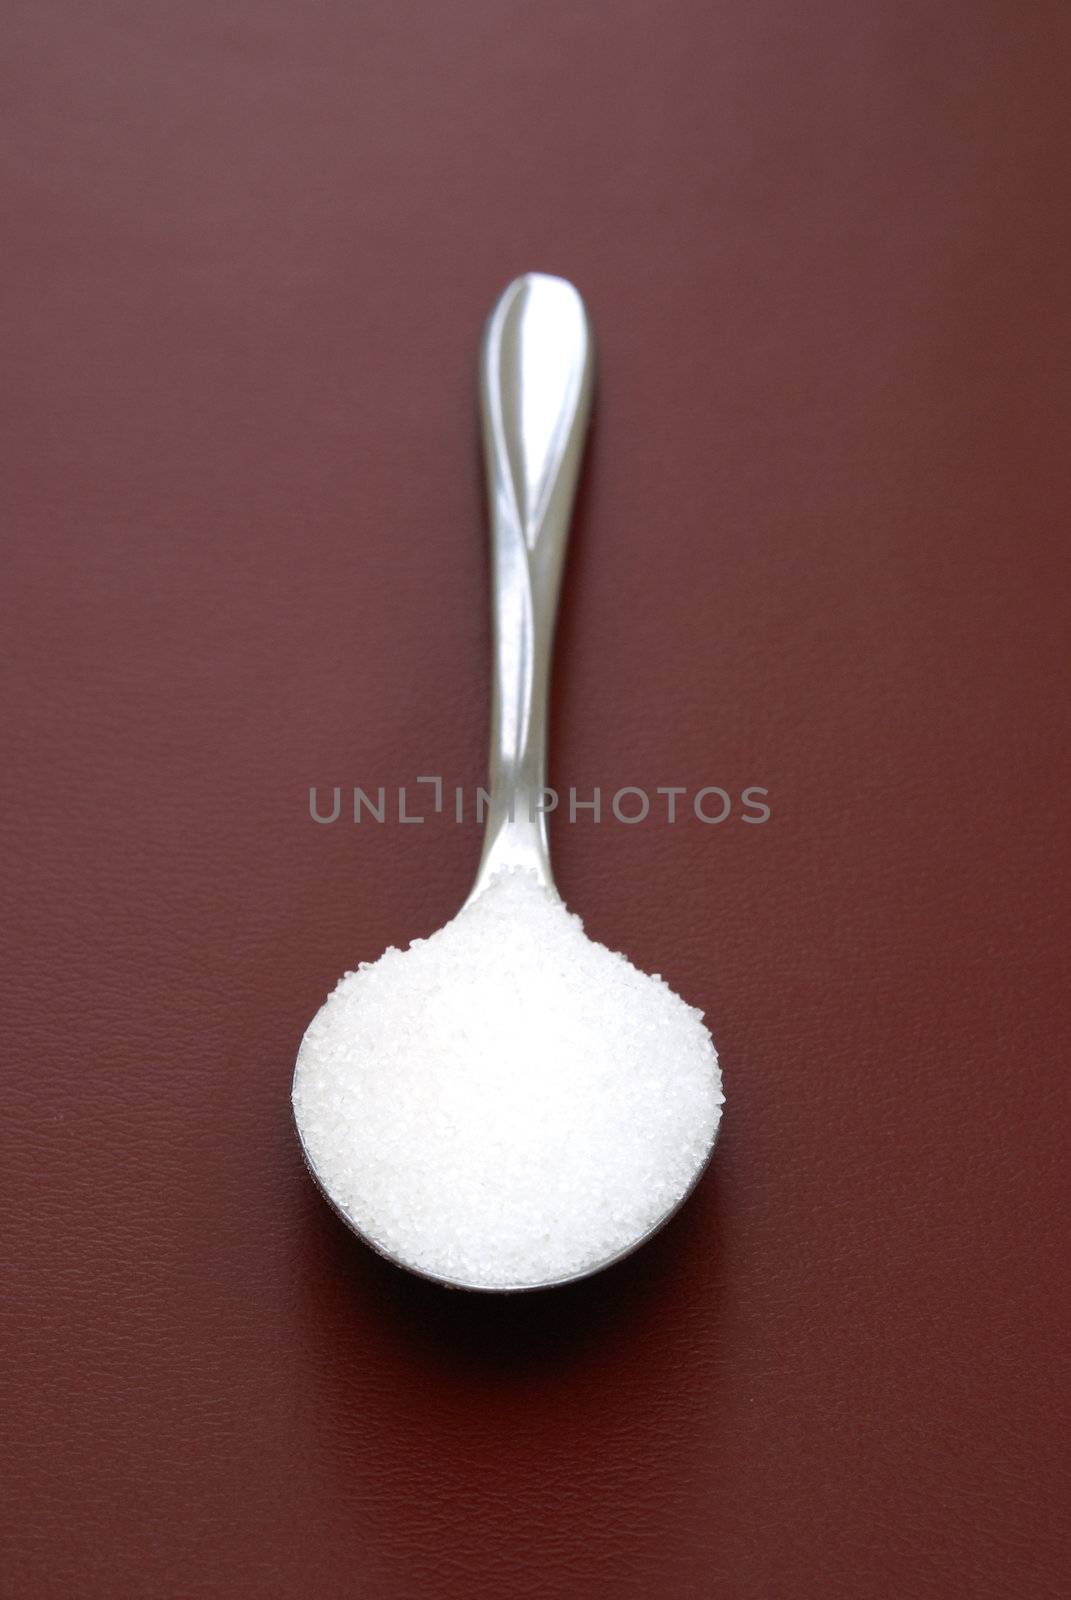 A teaspoon of sugar on red background.